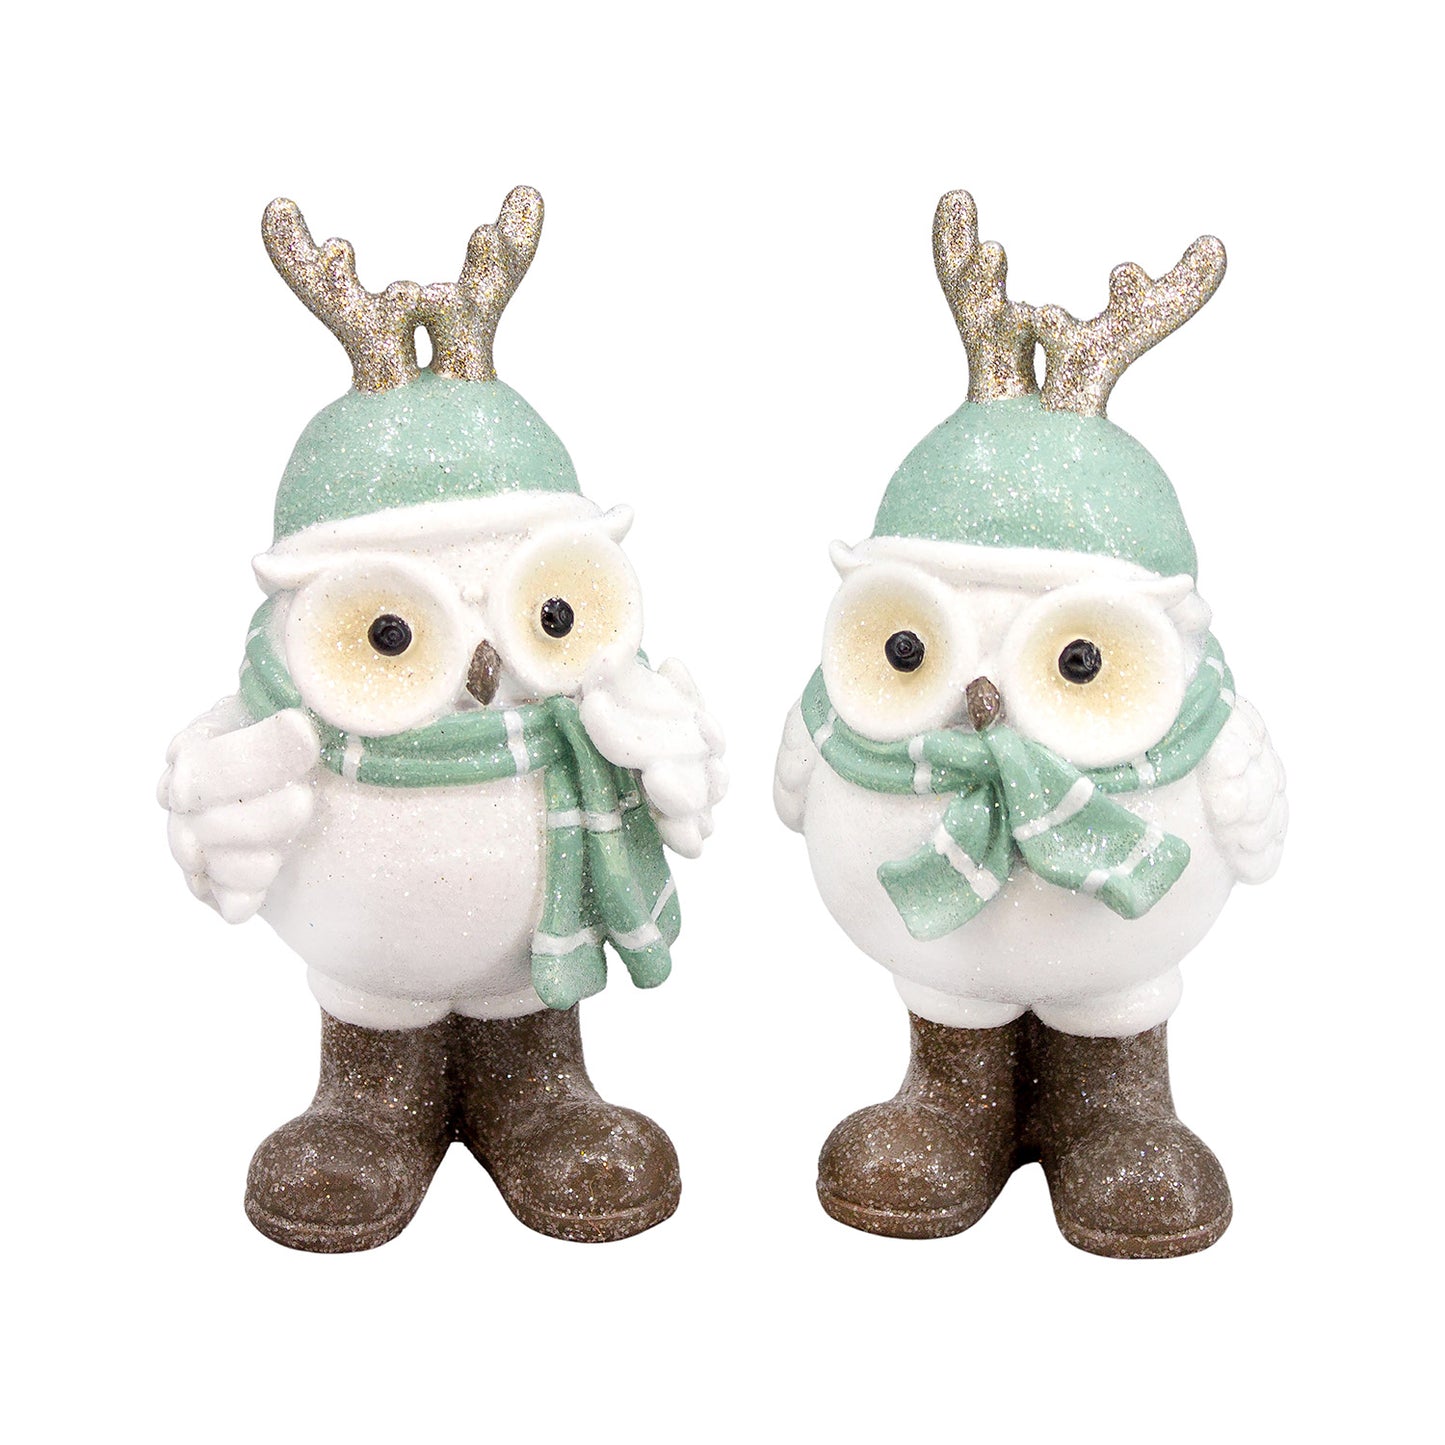 Green and white resin owls, 2 styles